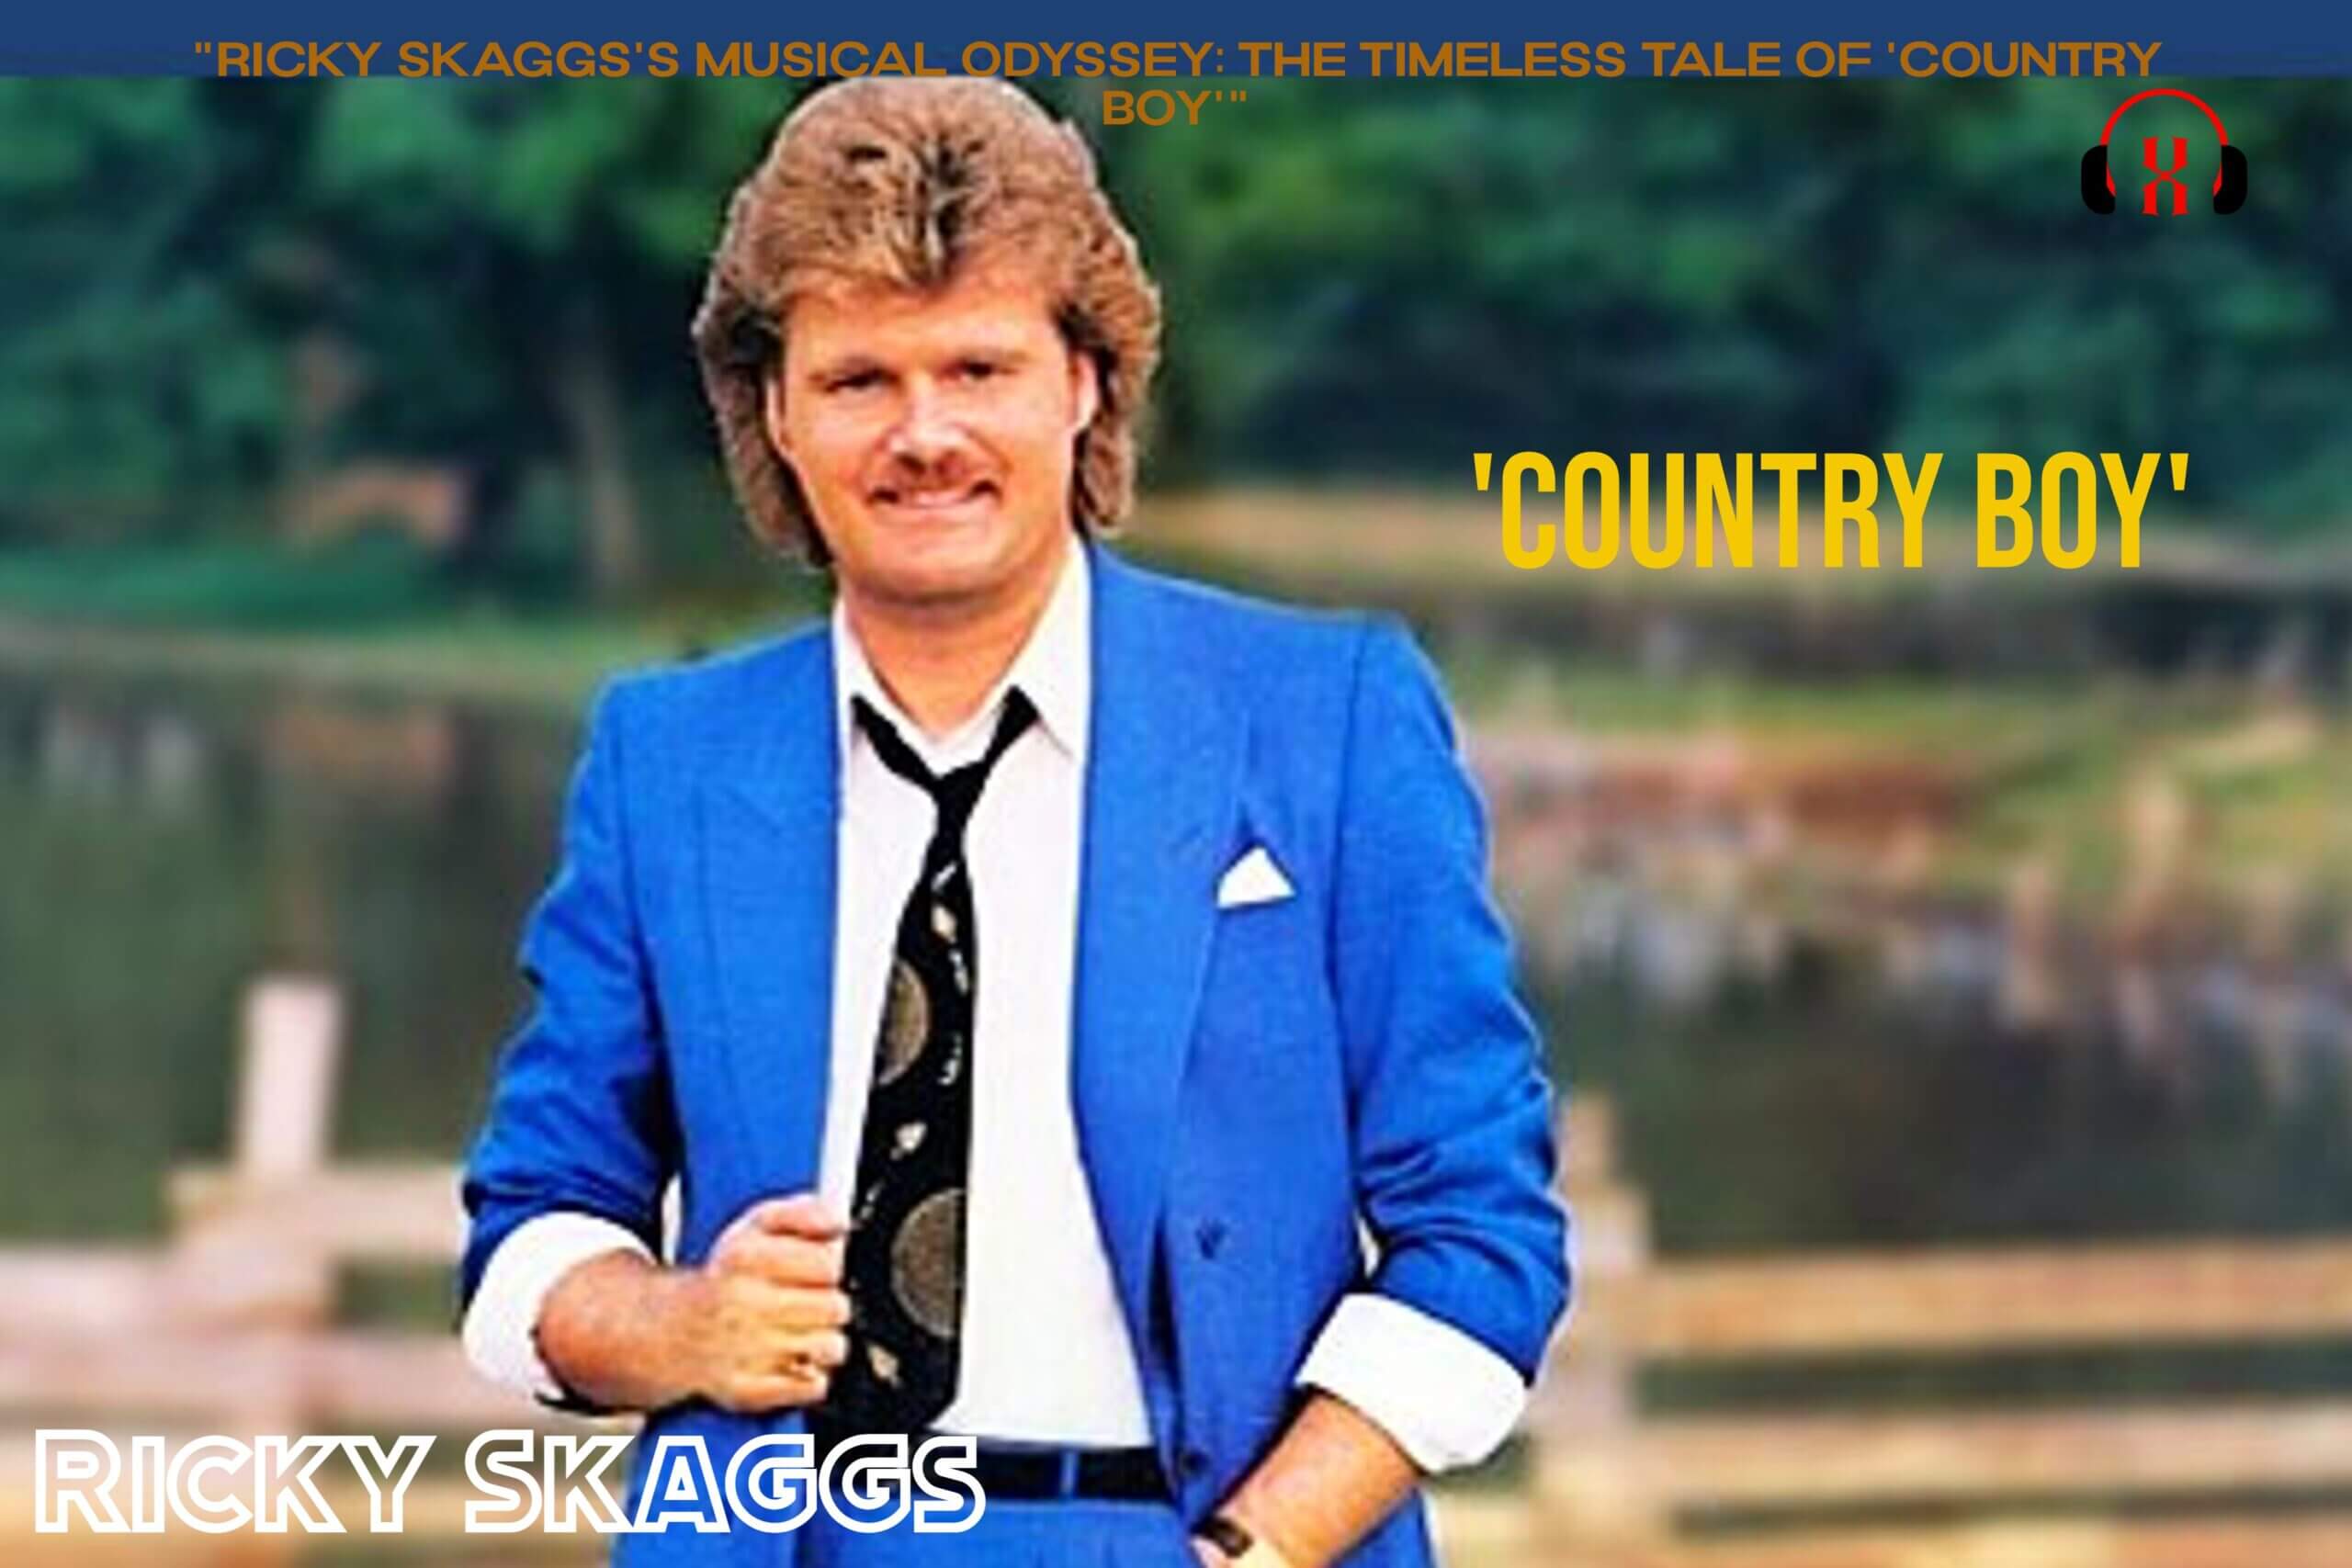 “Ricky Skaggs’s Musical Odyssey: The Timeless Tale of ‘Country Boy'”